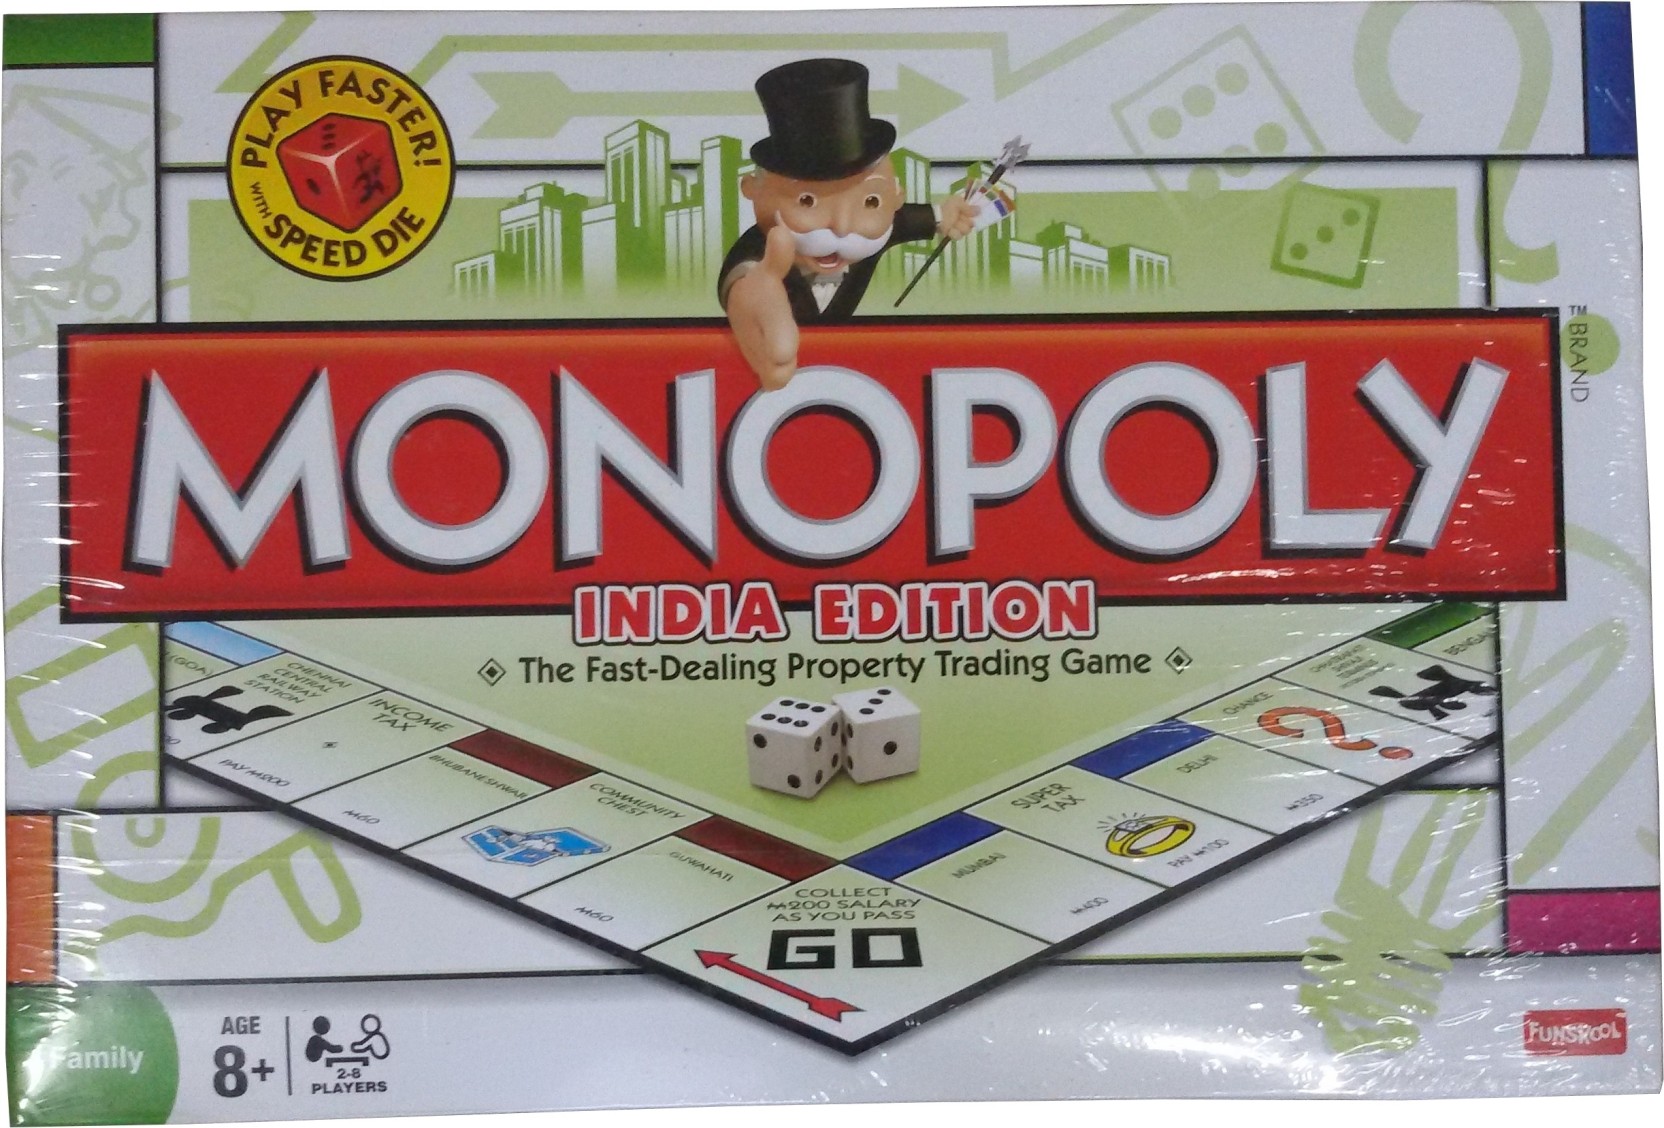 Girlguiding uk edition monopoly download online